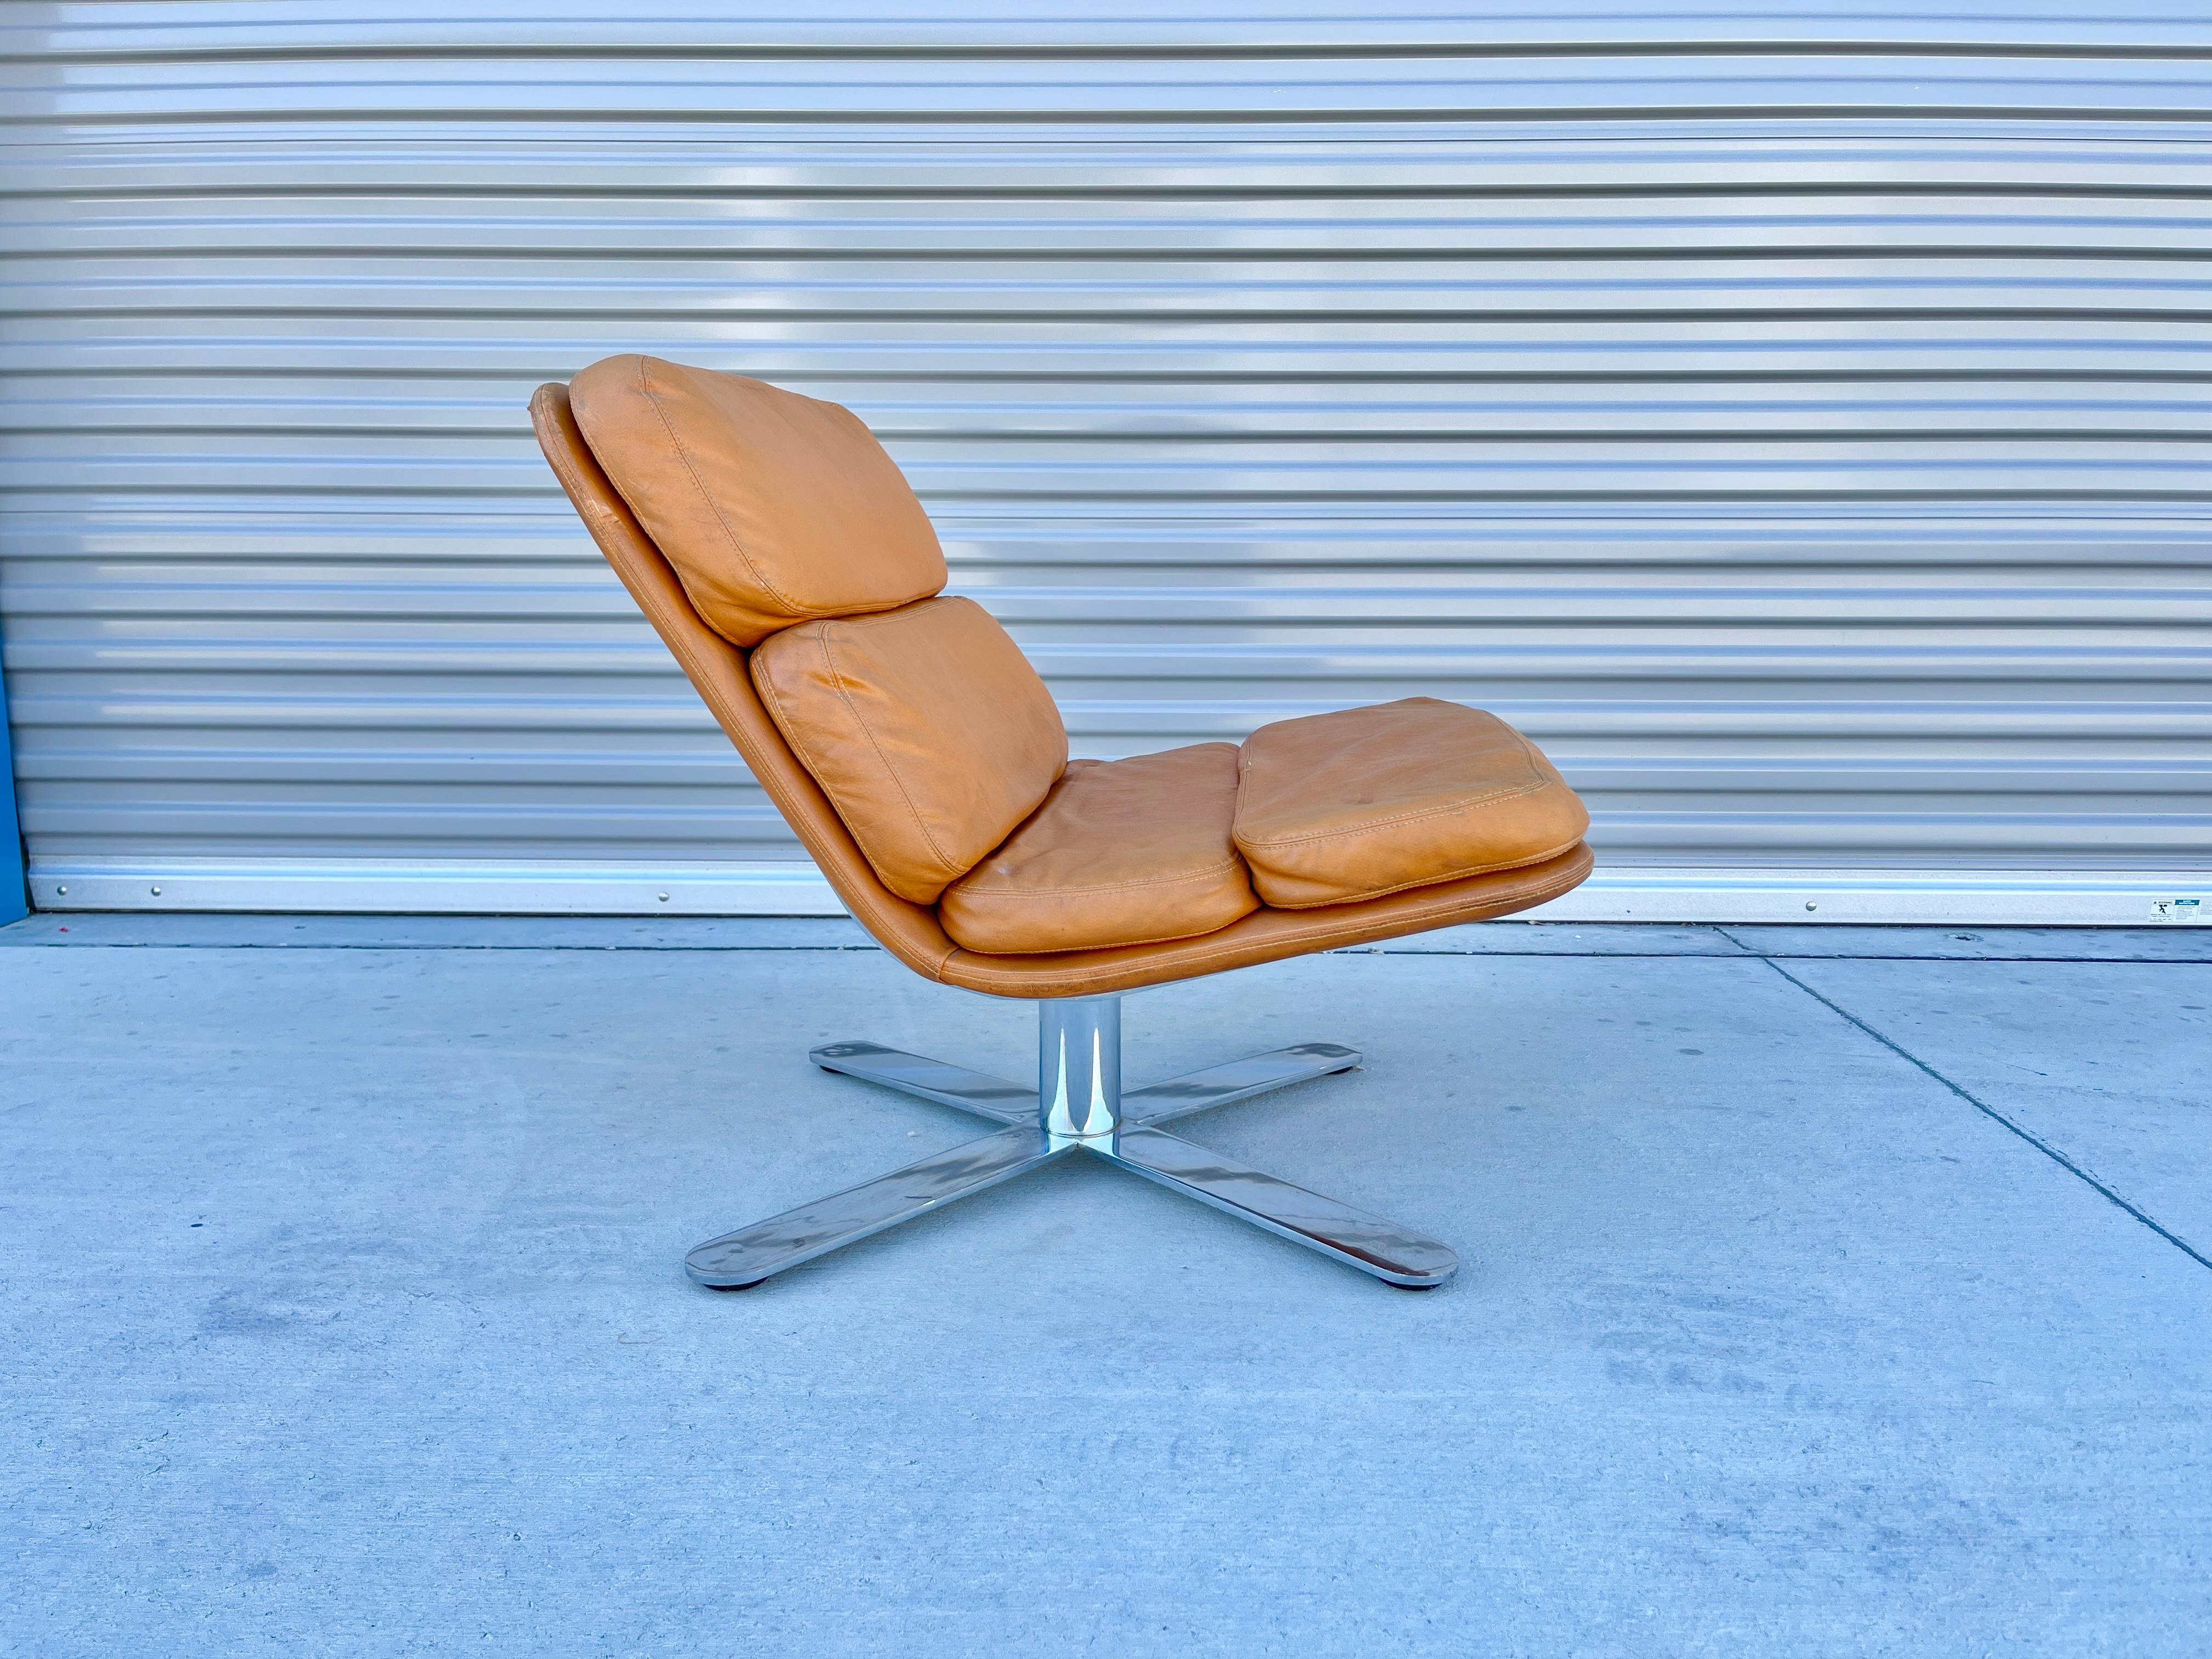 Vintage lounge chair designed by John Follis for Fortress in the United States, circa 1970s. This stunning chair is also known as the 